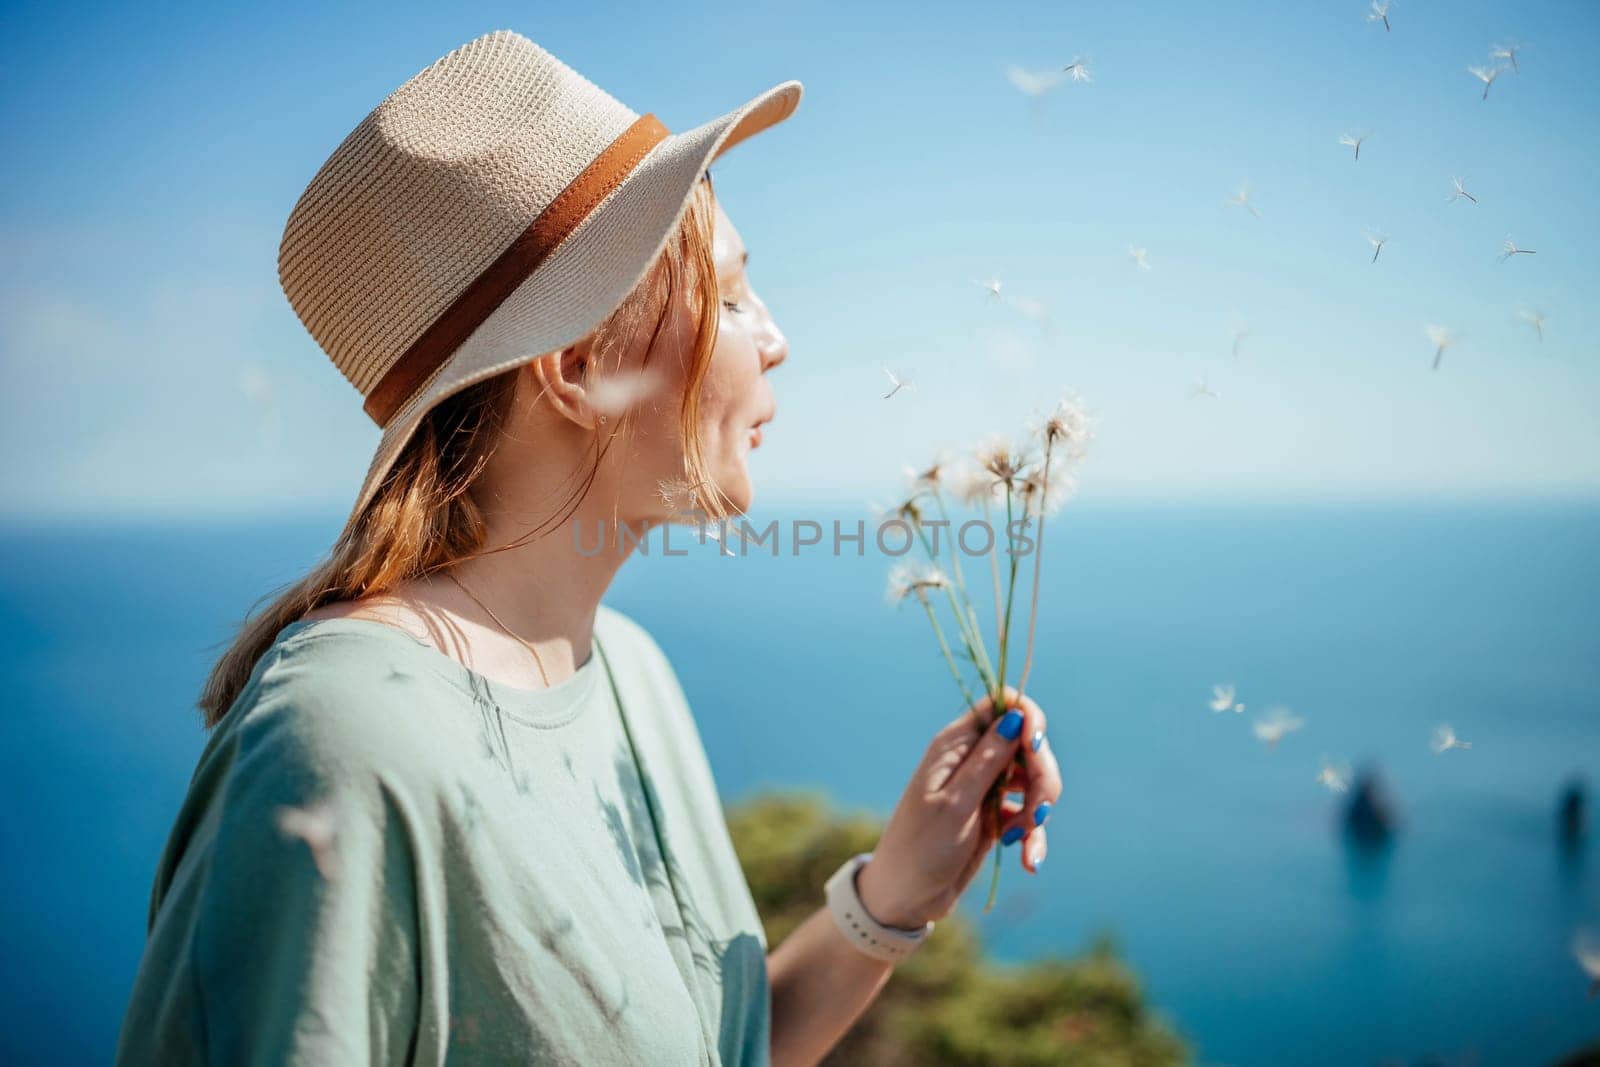 A woman wearing a straw hat is blowing on a bunch of dandelions. The scene is set on a beach with a blue ocean in the background. The woman is enjoying the moment and the beauty of the flowers